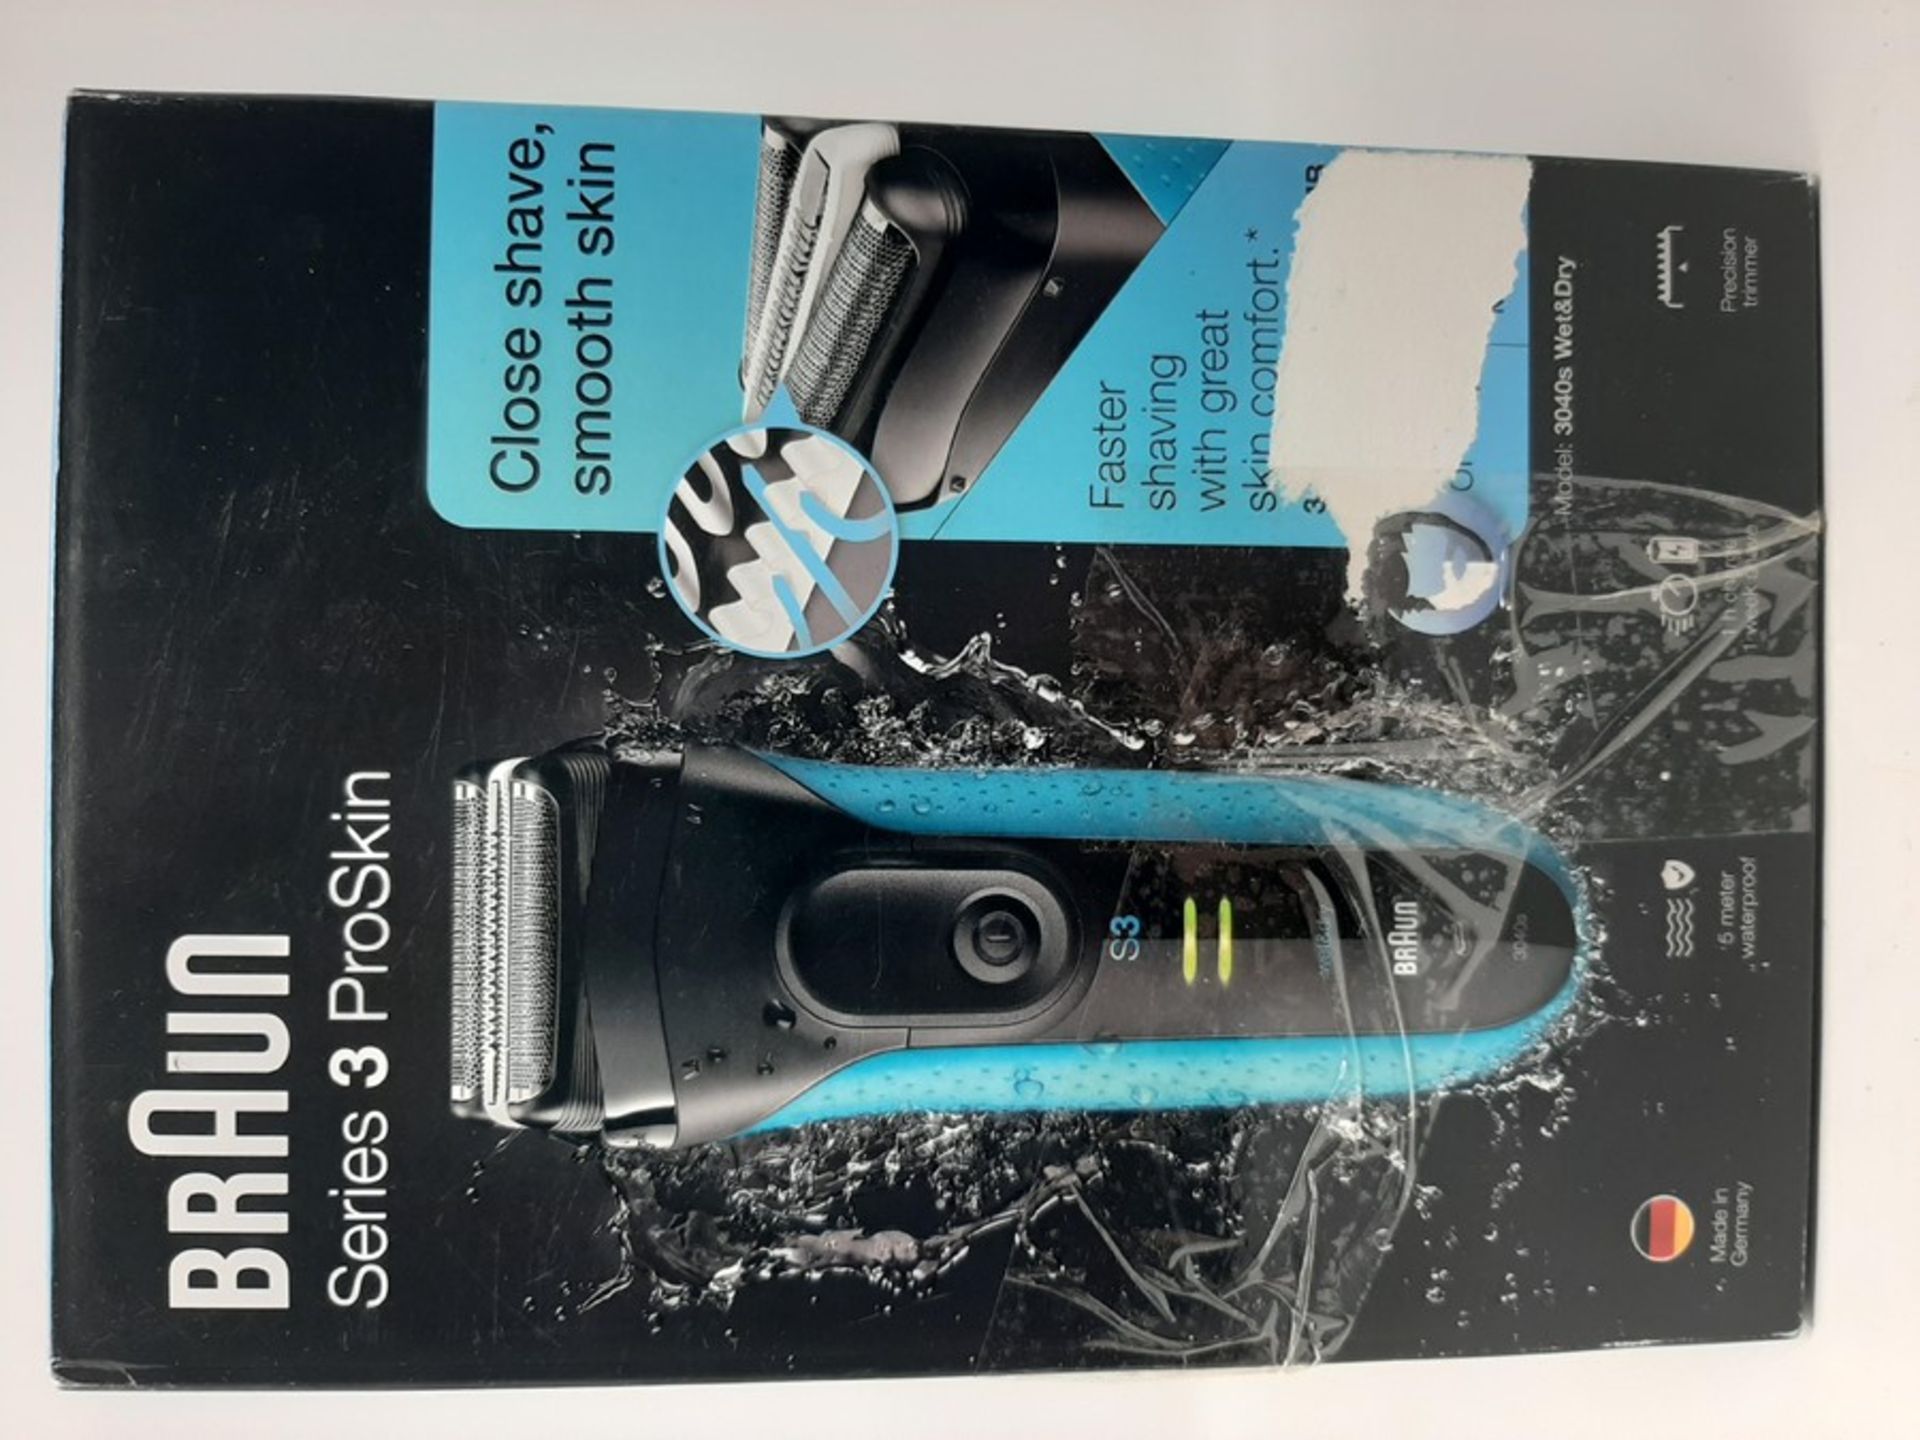 Braun Series 3 ProSkin 3040s Electric Shaver, We - Image 2 of 2